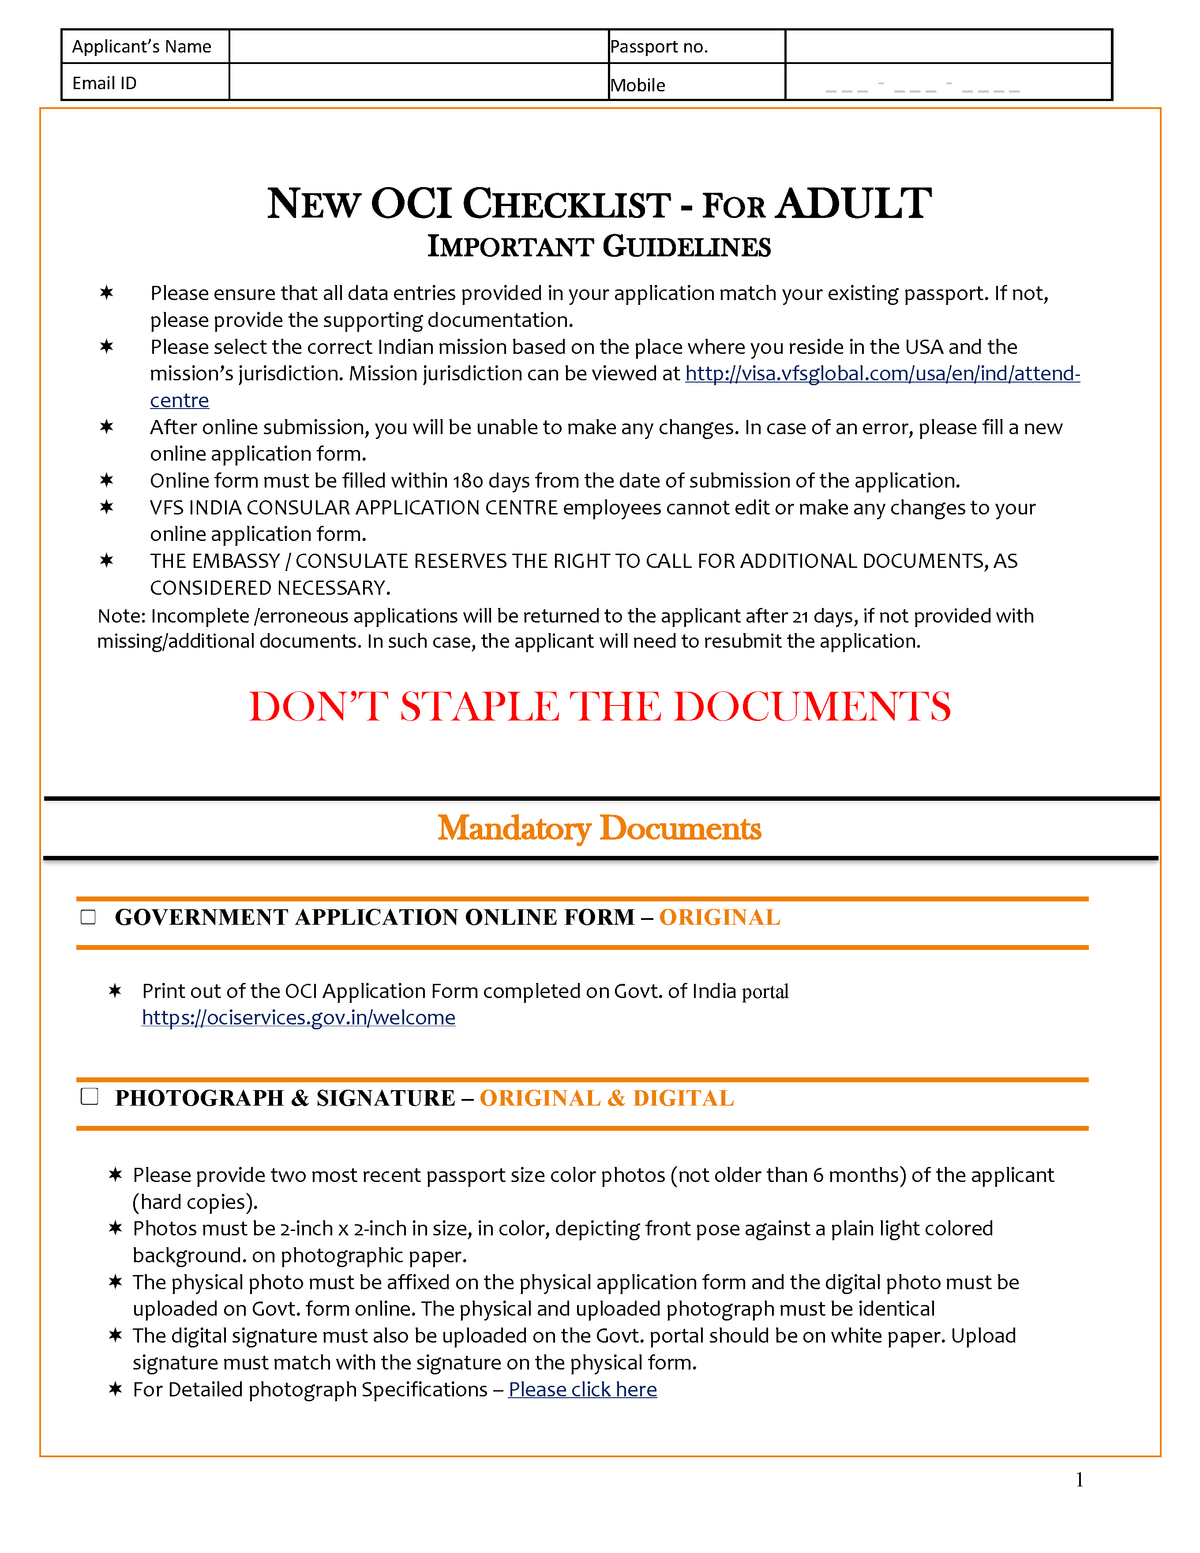 Oci Checklist Email Id Mobile New Oci Checklist For Adult Important 2960